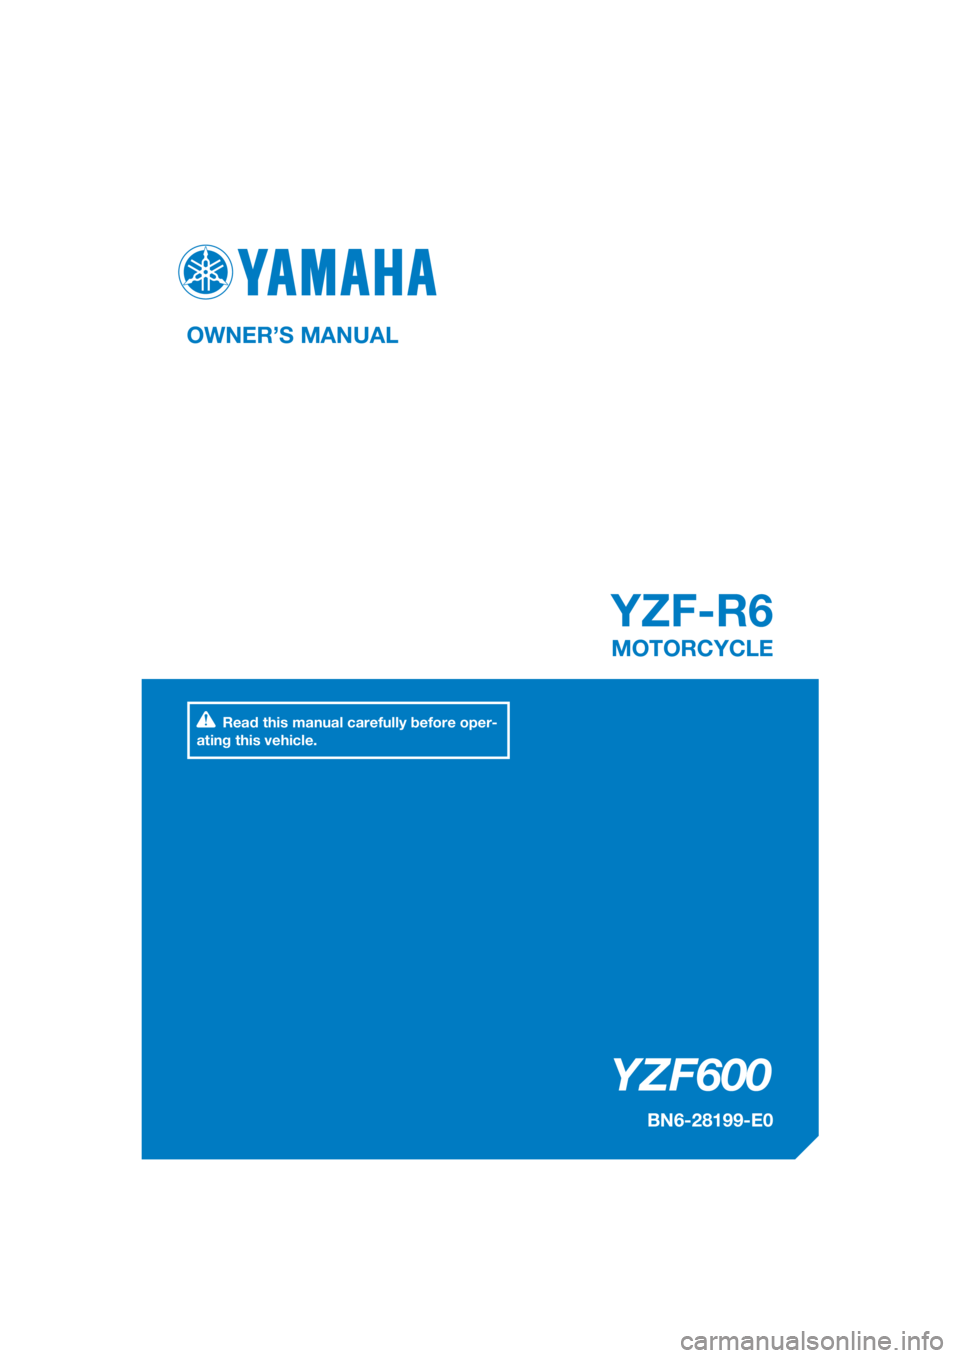 YAMAHA YZF-R6 2017  Owners Manual DIC183
YZF600
YZF-R6
OWNER’S MANUAL
BN6-28199-E0
MOTORCYCLE
[English  (E)]
Read this manual carefully before oper-
ating this vehicle. 